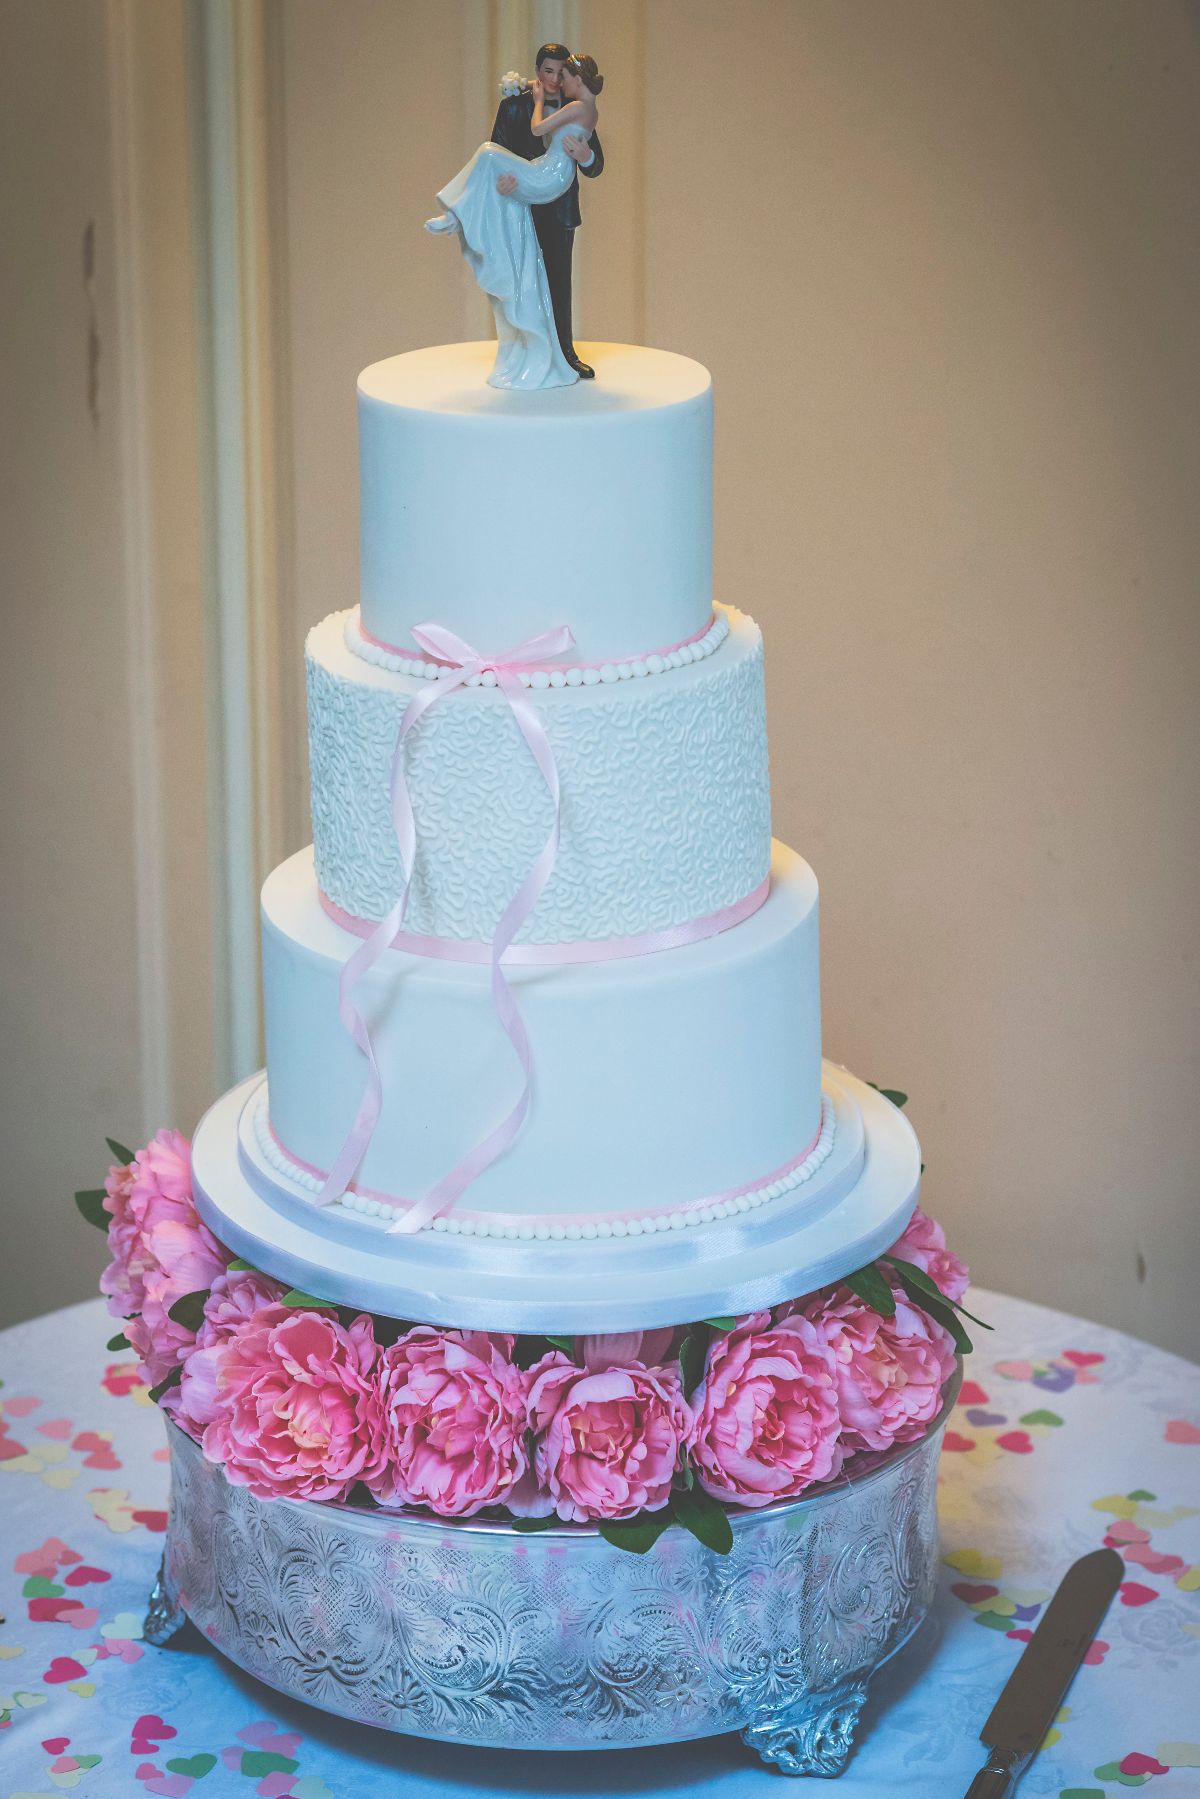 Our beautifully designed and scrumptious cake by Rebakers - flavours included white chocolate, salted caramel and chocolate caramel. All the cake was gone before we had a chance to have any!